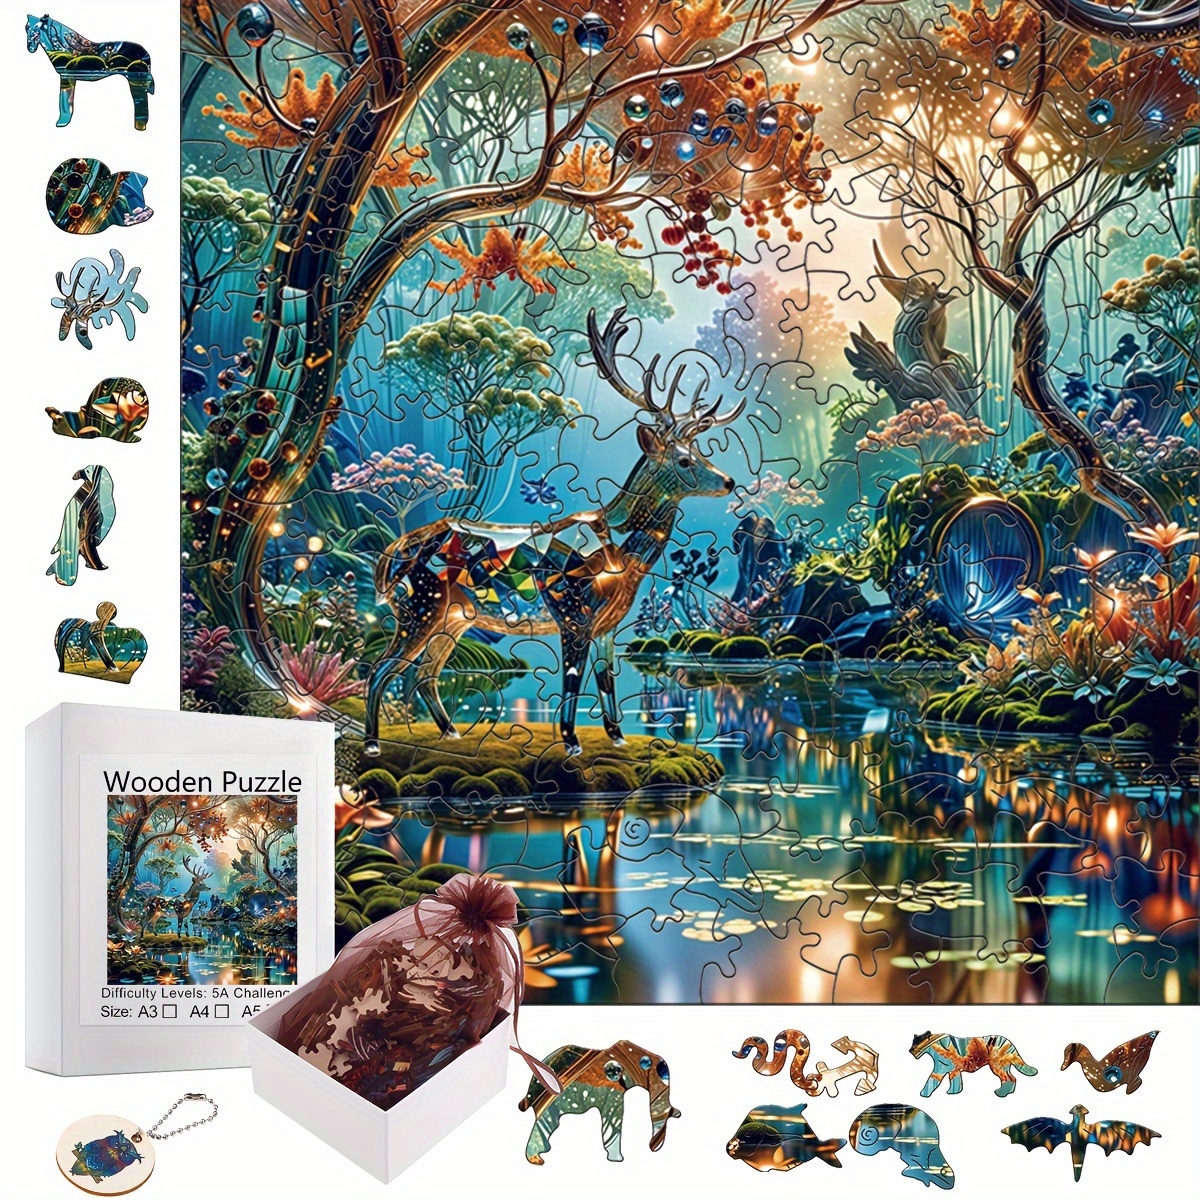 

Colorful Animal Wooden Puzzle - Cognitive Enhancement Game For All Ages, Comes With Elegant White Pieceaging, Ideal For Holiday Or Birthday Present